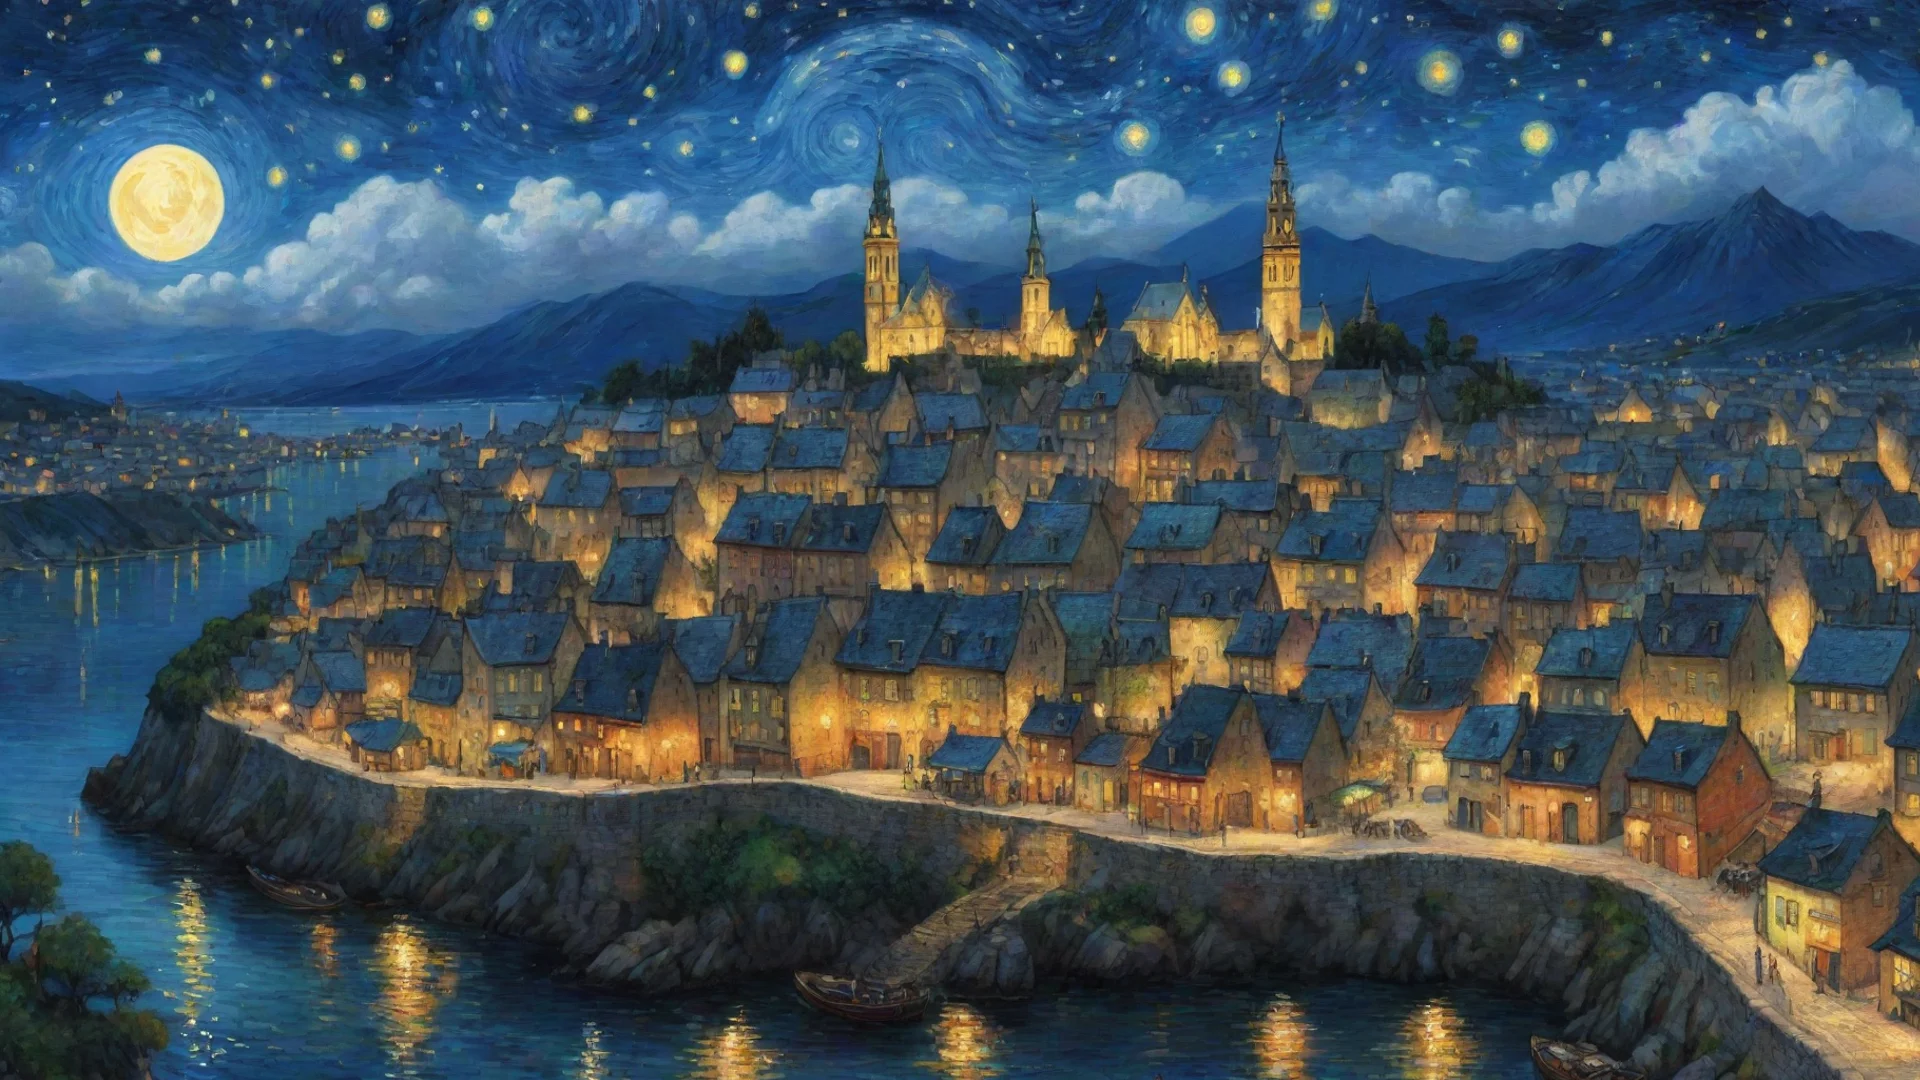 amazing town lit up at night sky epic lovely artistic ghibli van gogh happyness bliss peace  detailed asthetic hd wow awesome portrait 2 wide